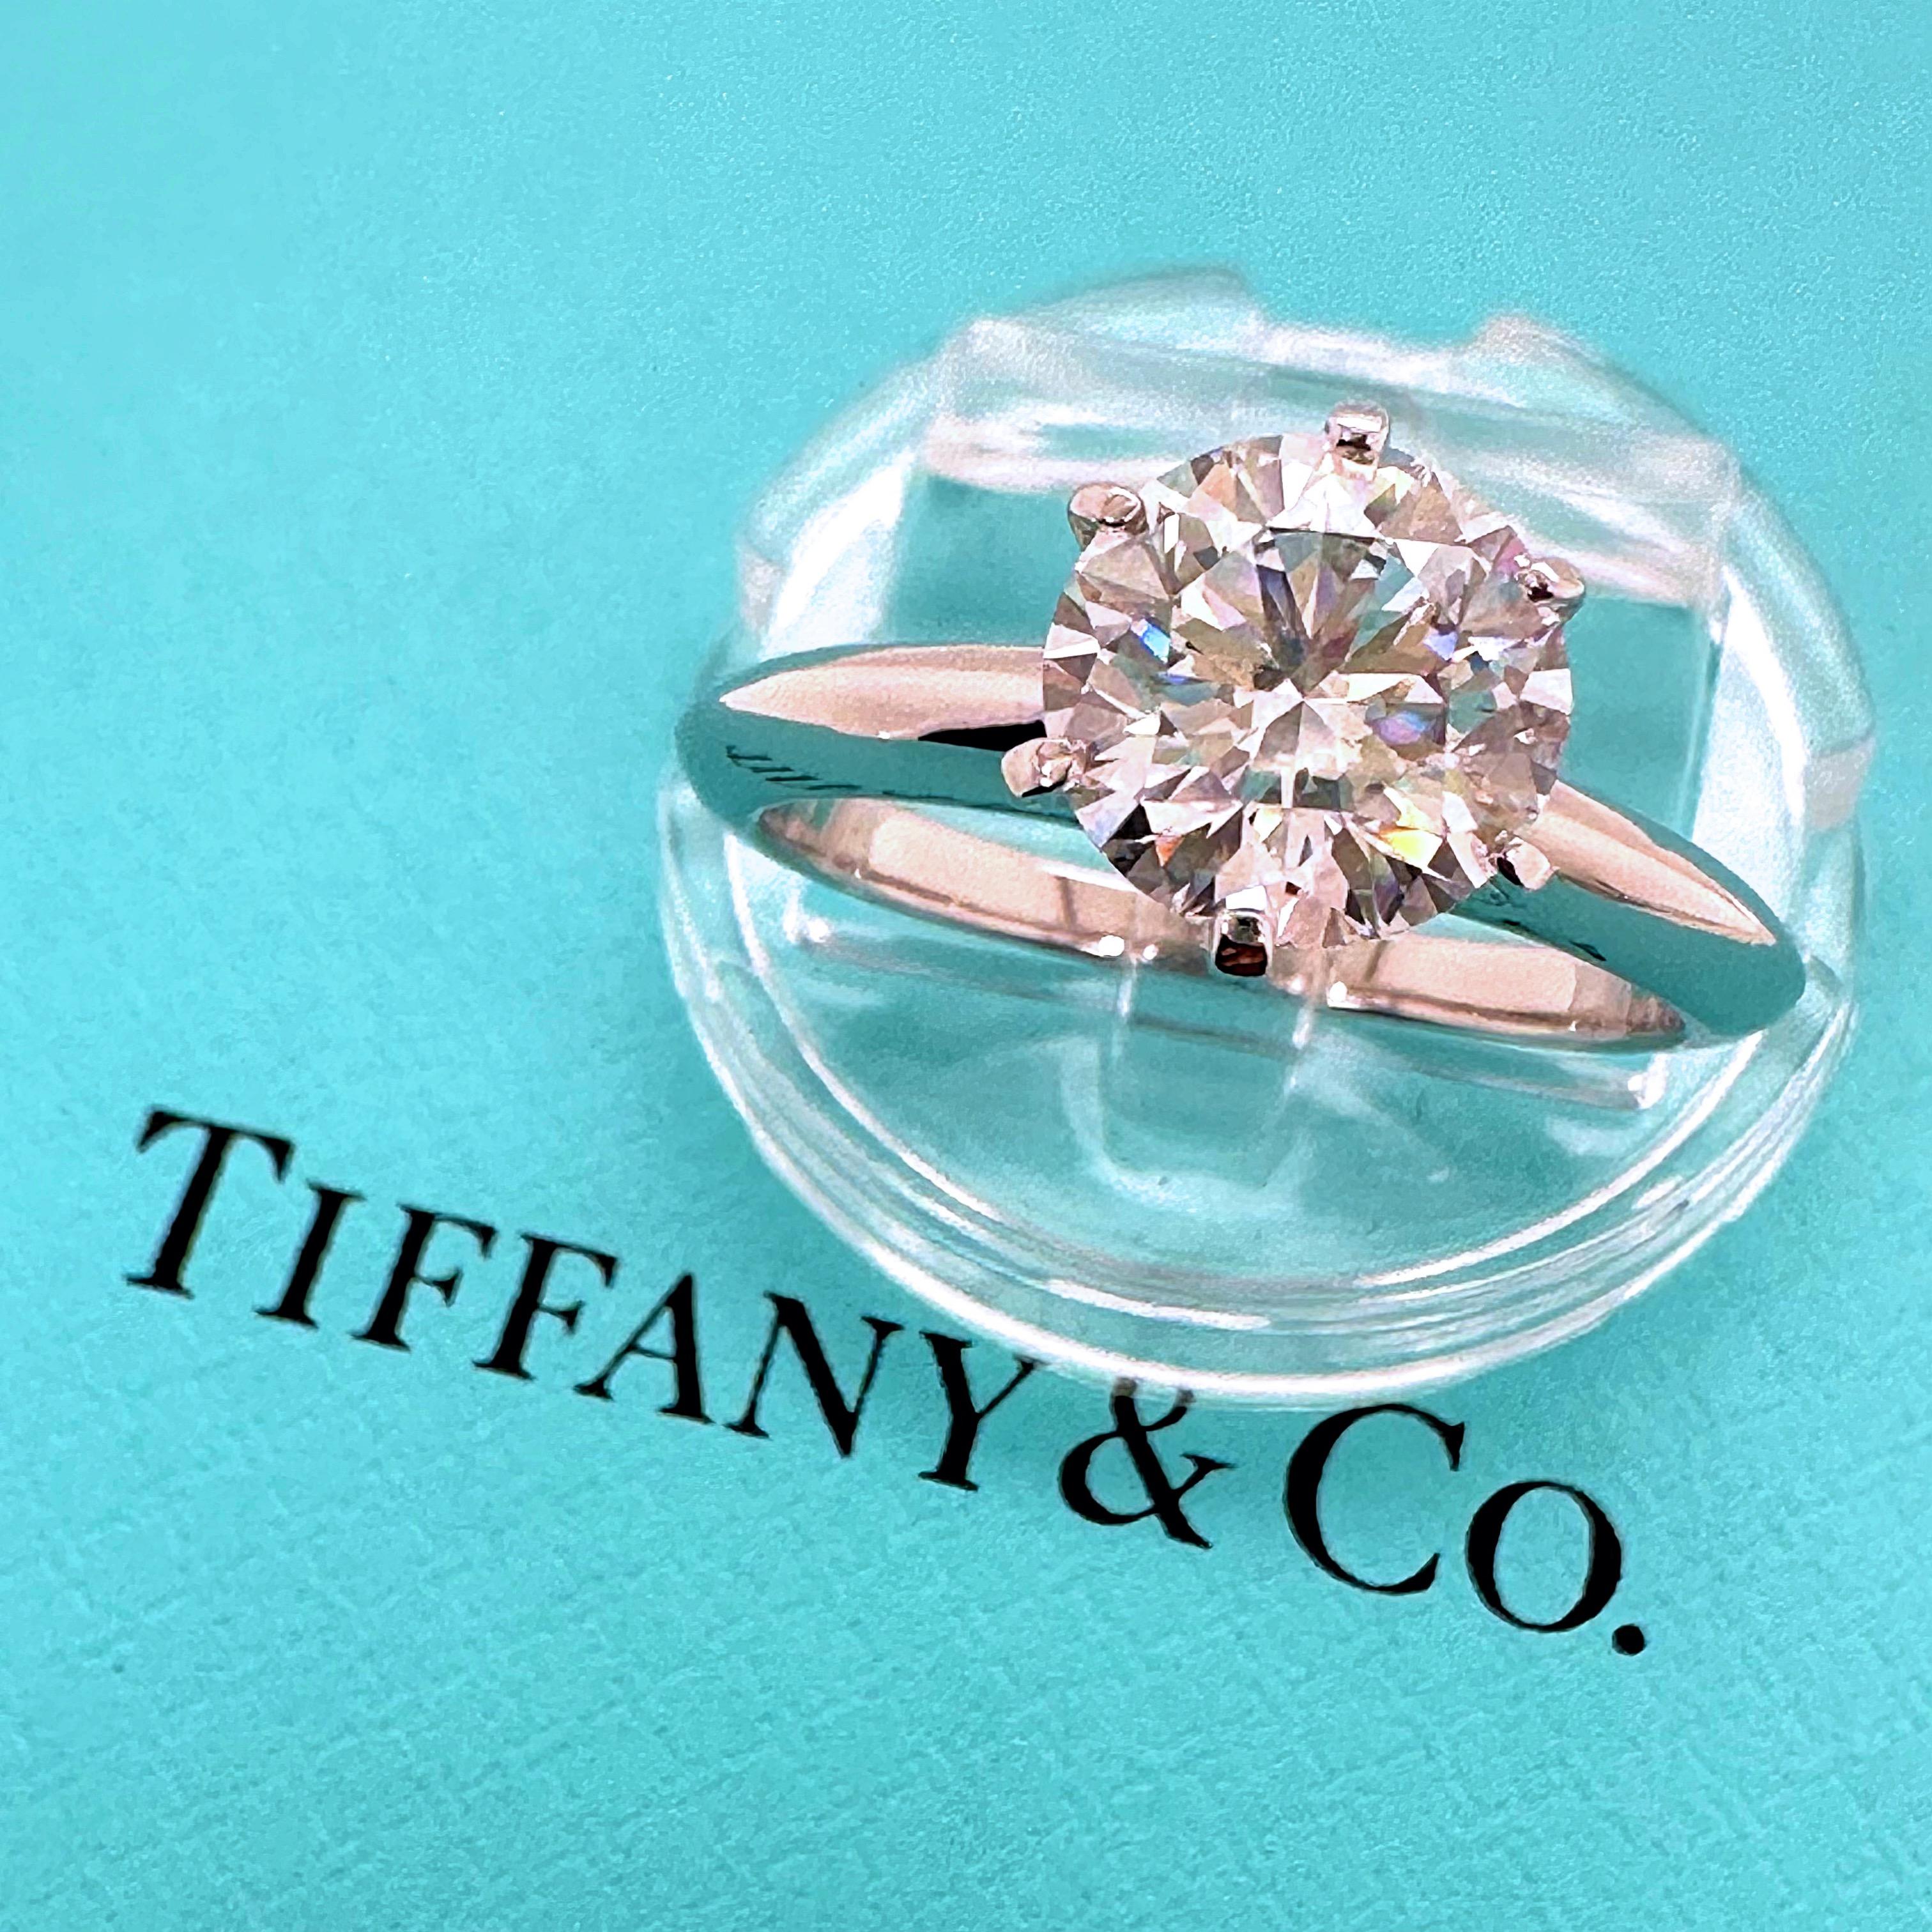 Tiffany & Co. Tiffany Setting Engagement Ring 
Style:  Solitaire
Ref. number:  35149589 / P12100279
Metal:  Platinum PT950
Size:  7 sizable
Measurements:  2 mm
TCW:  1.72 cts
Main Diamond:  Round Brilliant diamond
Color & Clarity:  H, VVS2
Diamond